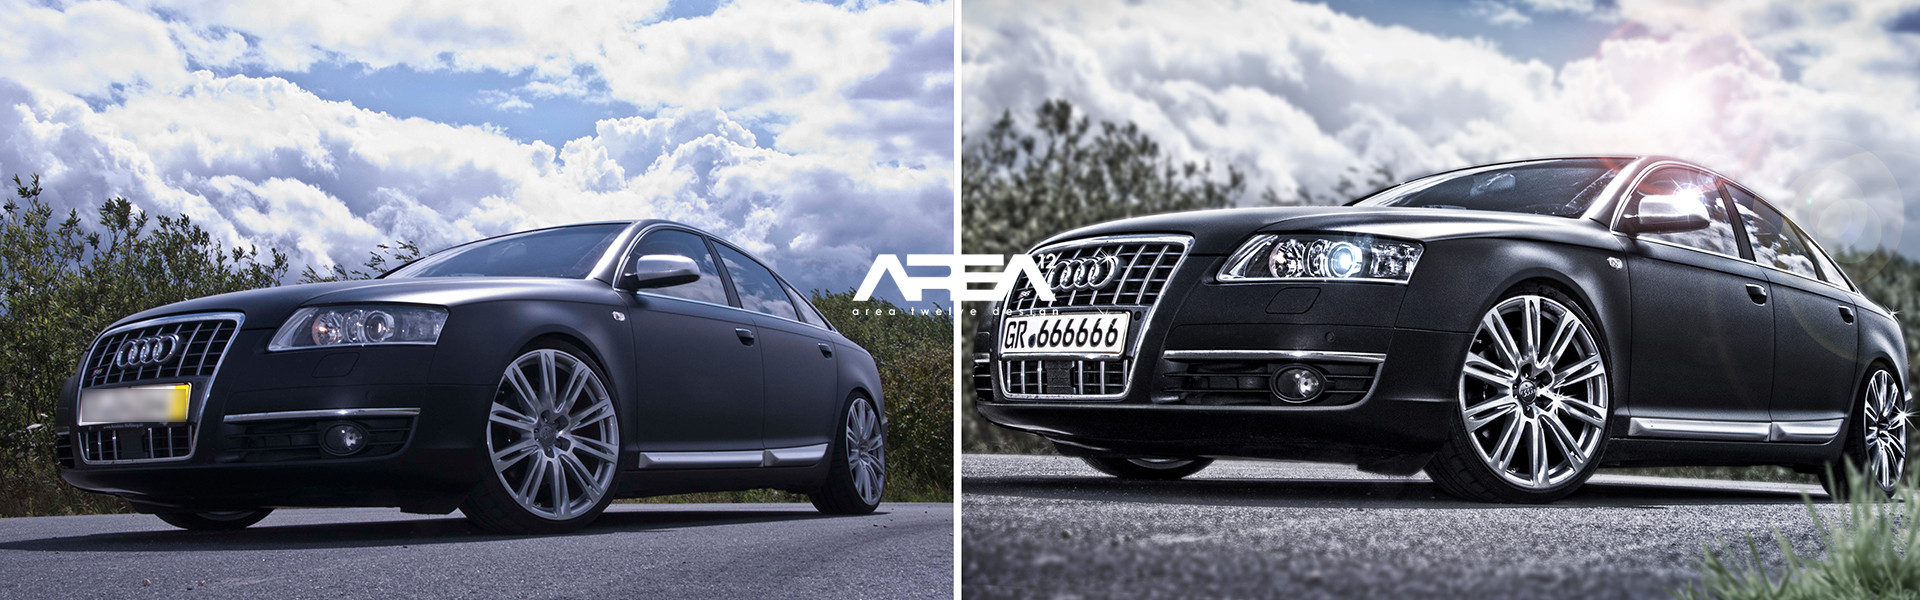 before_after_audis6